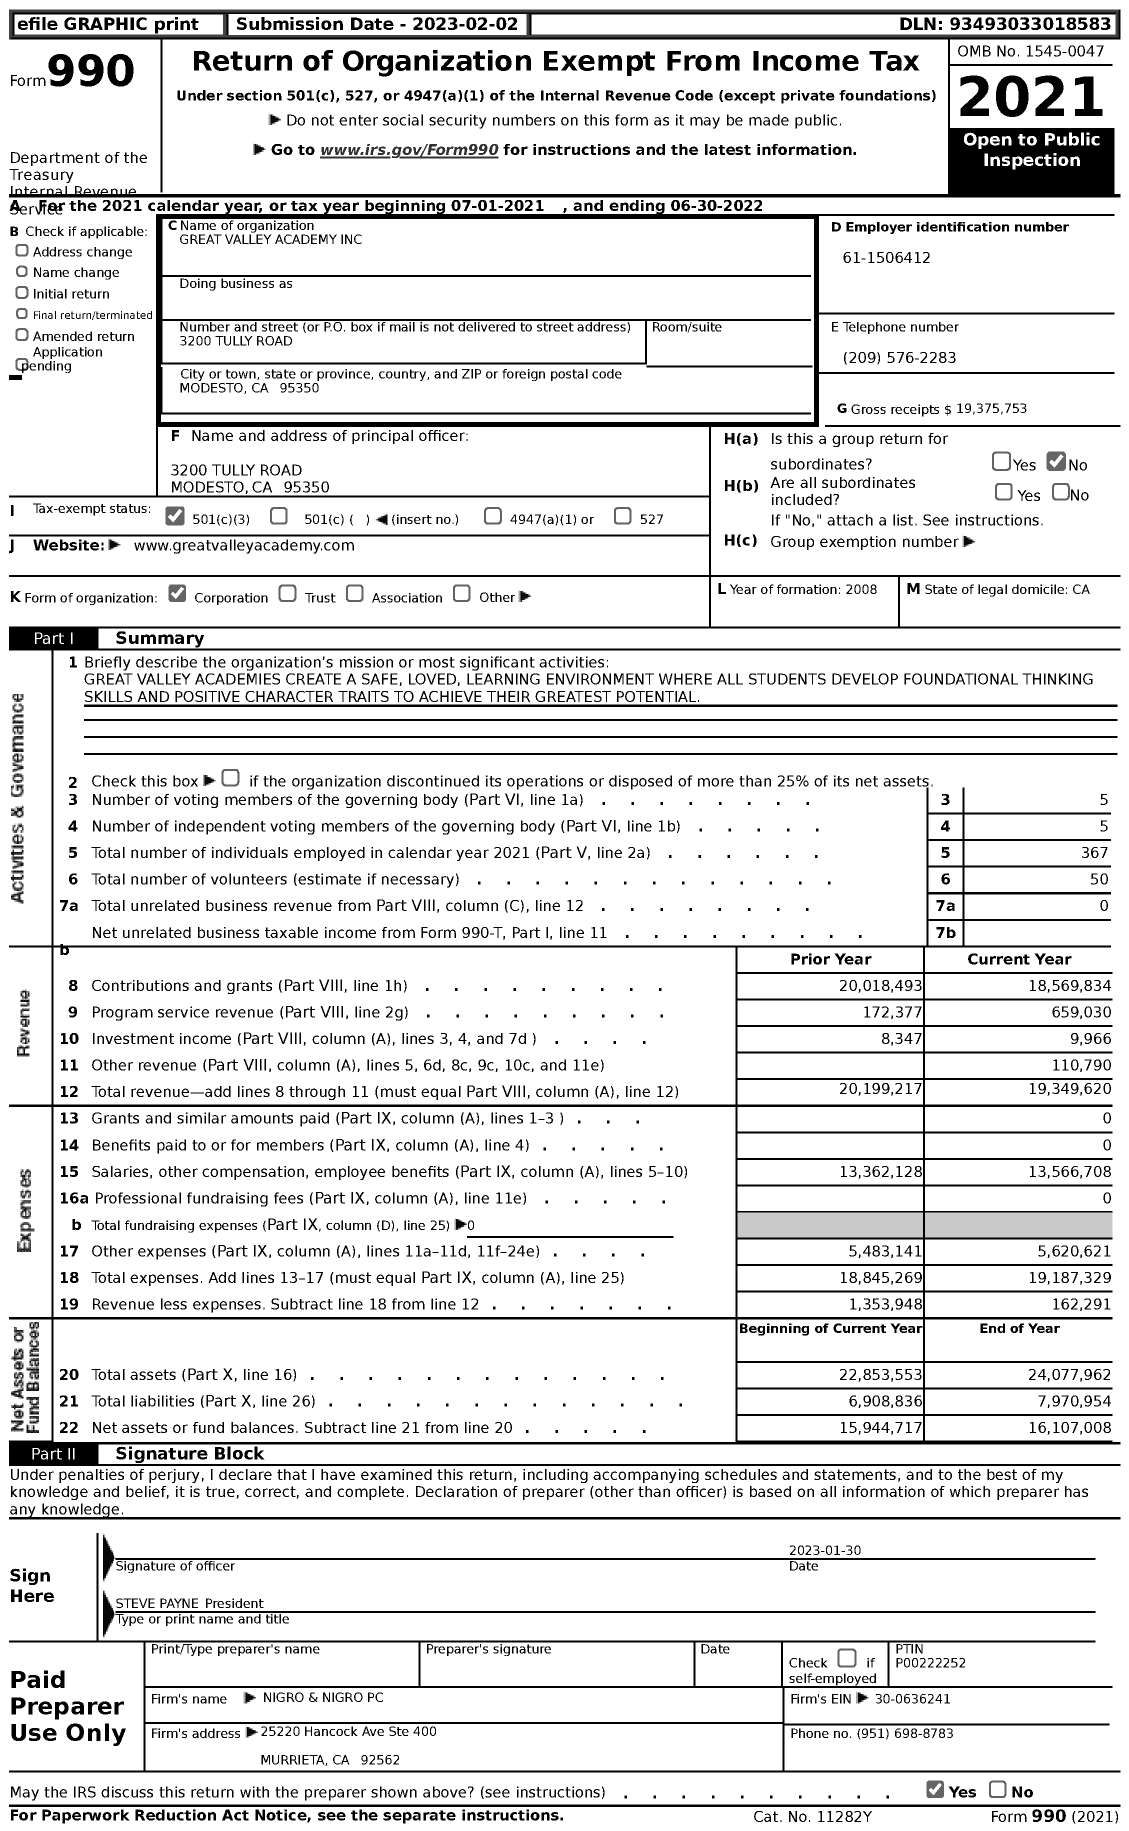 Image of first page of 2021 Form 990 for Great Valley Academy (GVA)